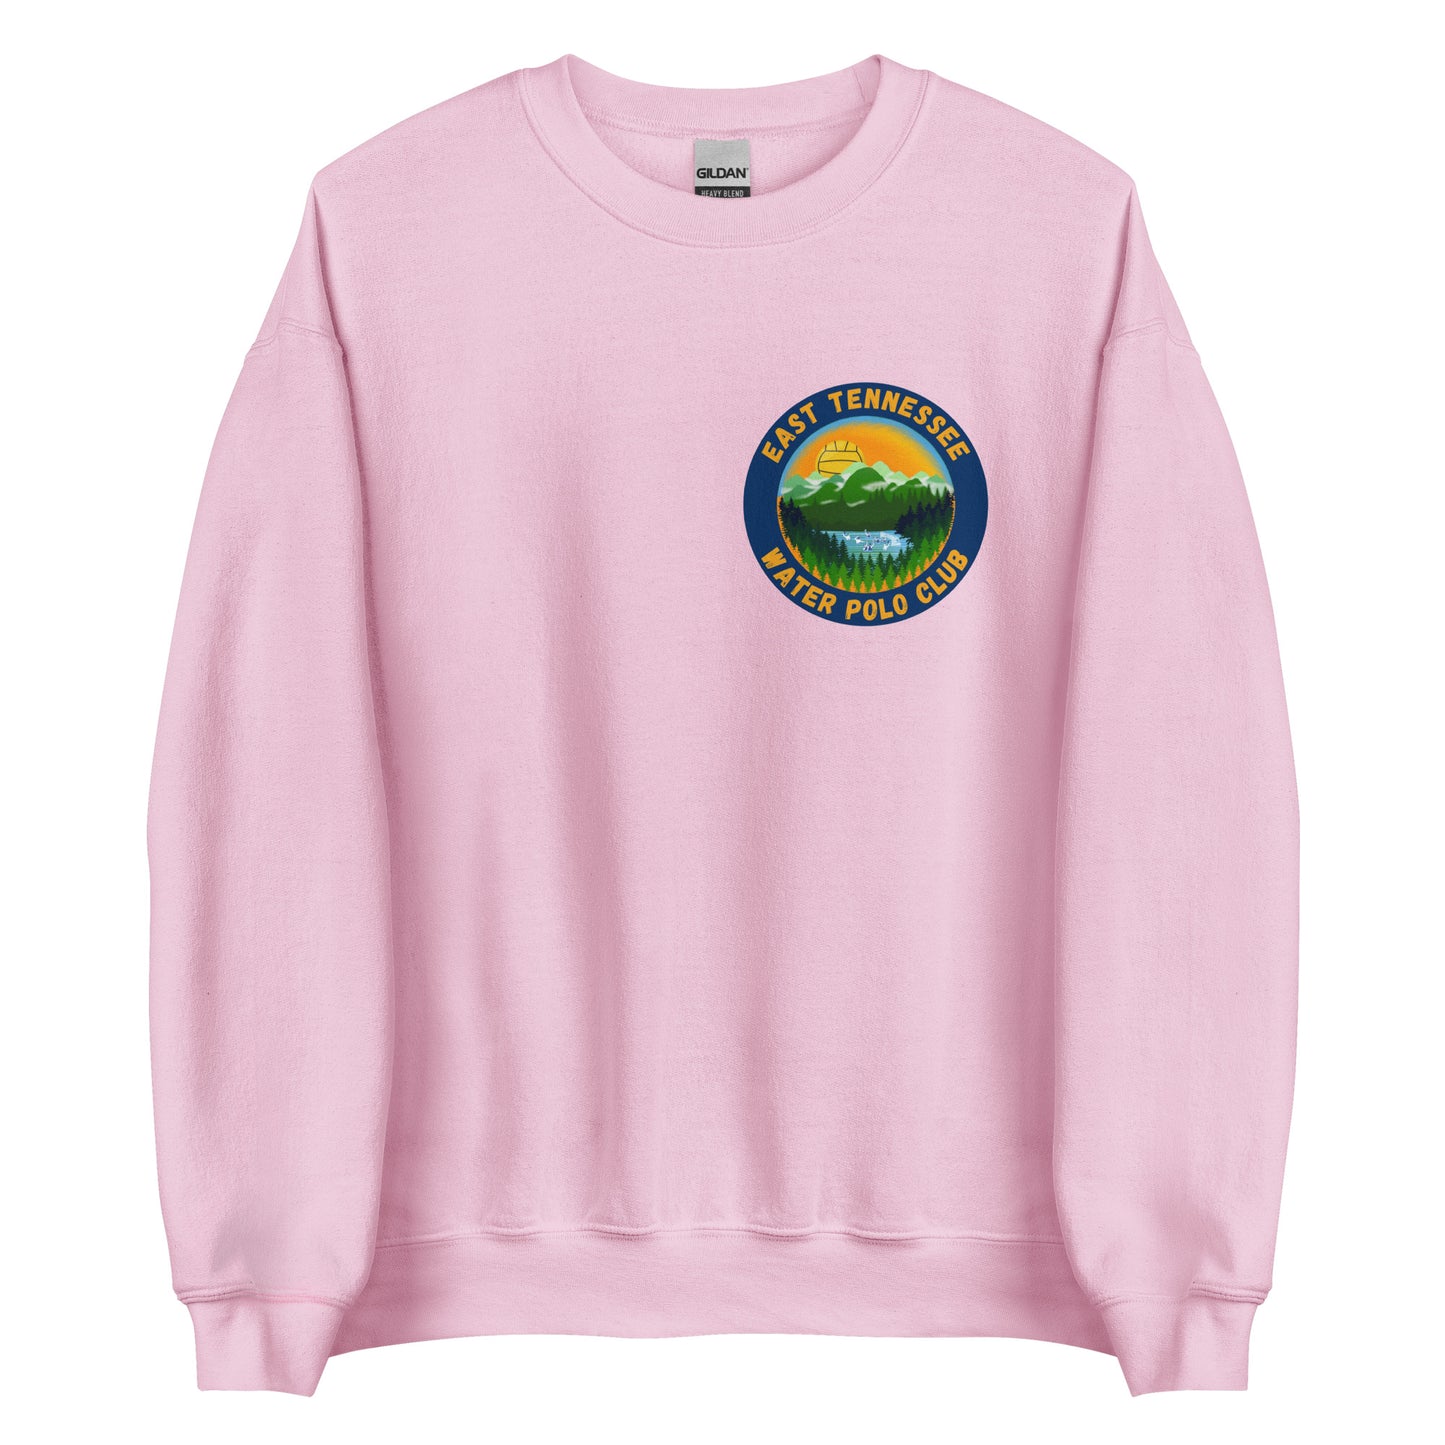 East Tennessee WPC Unisex Sweatshirt (front and back design)